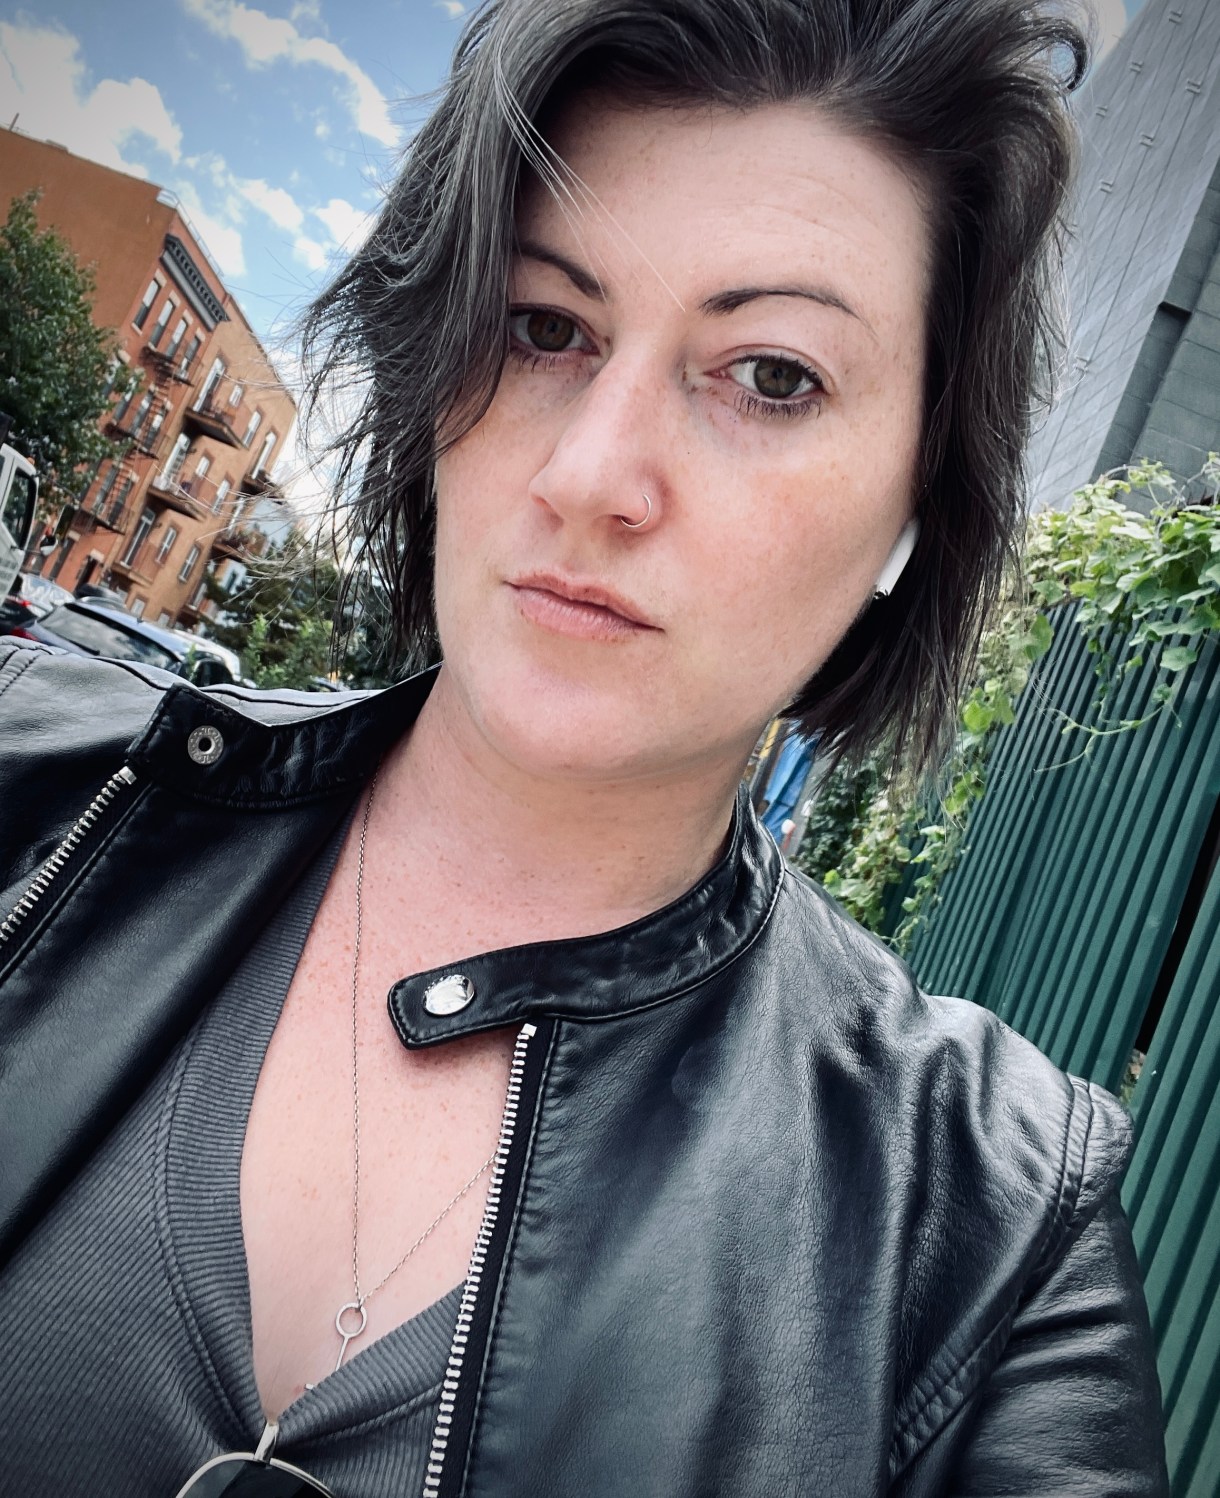 meg, a white woman with dark salt and pepper hair looks at the camera. she is wearing a leather jacket and a gray tee shirt